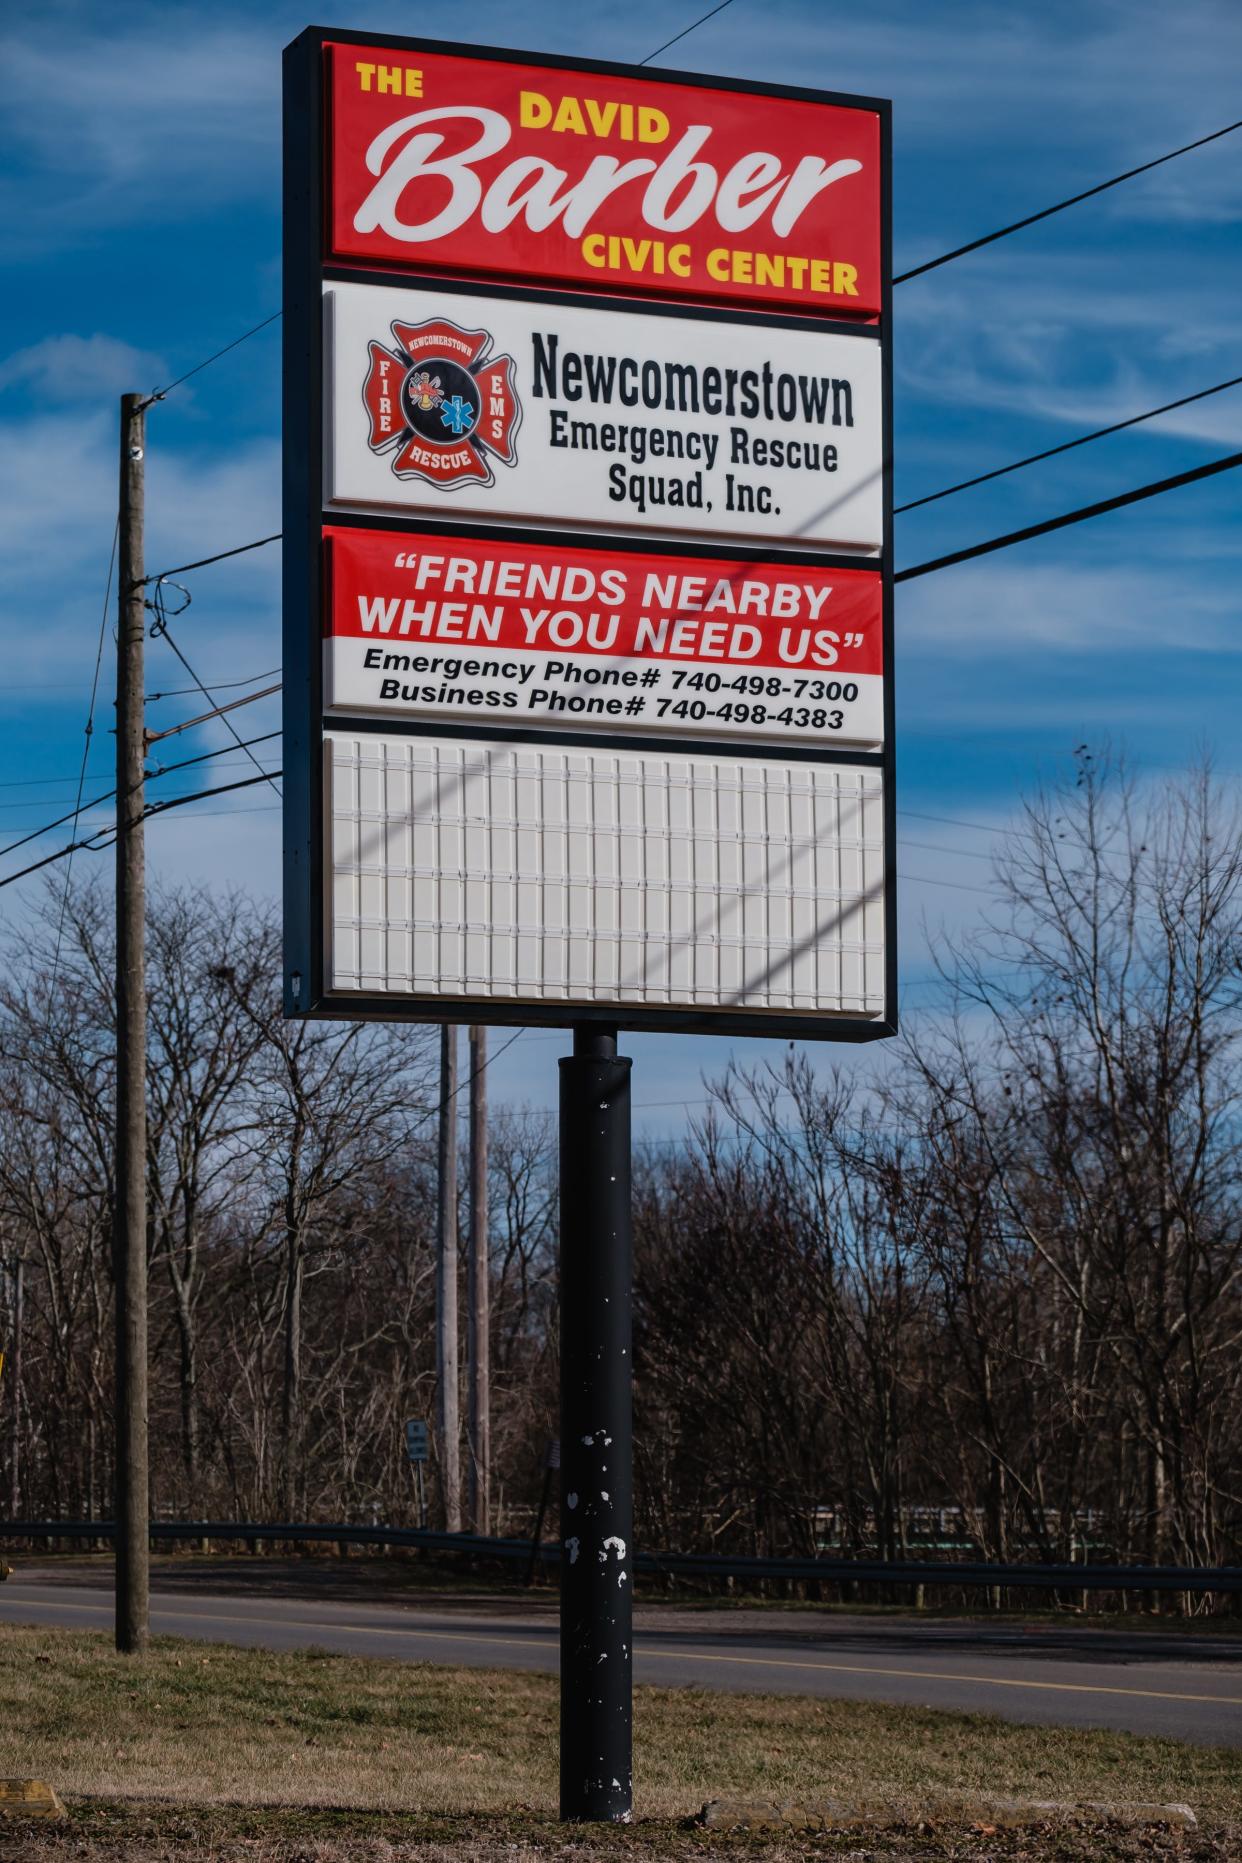 Tuscarawas County Common Pleas Judge Elizabeth Lehigh Thomakos has ordered the Newcomerstown Emergency Rescue Squad Inc. to shut down. She has appointed a Columbus attorney as a receiver to protect its assets.